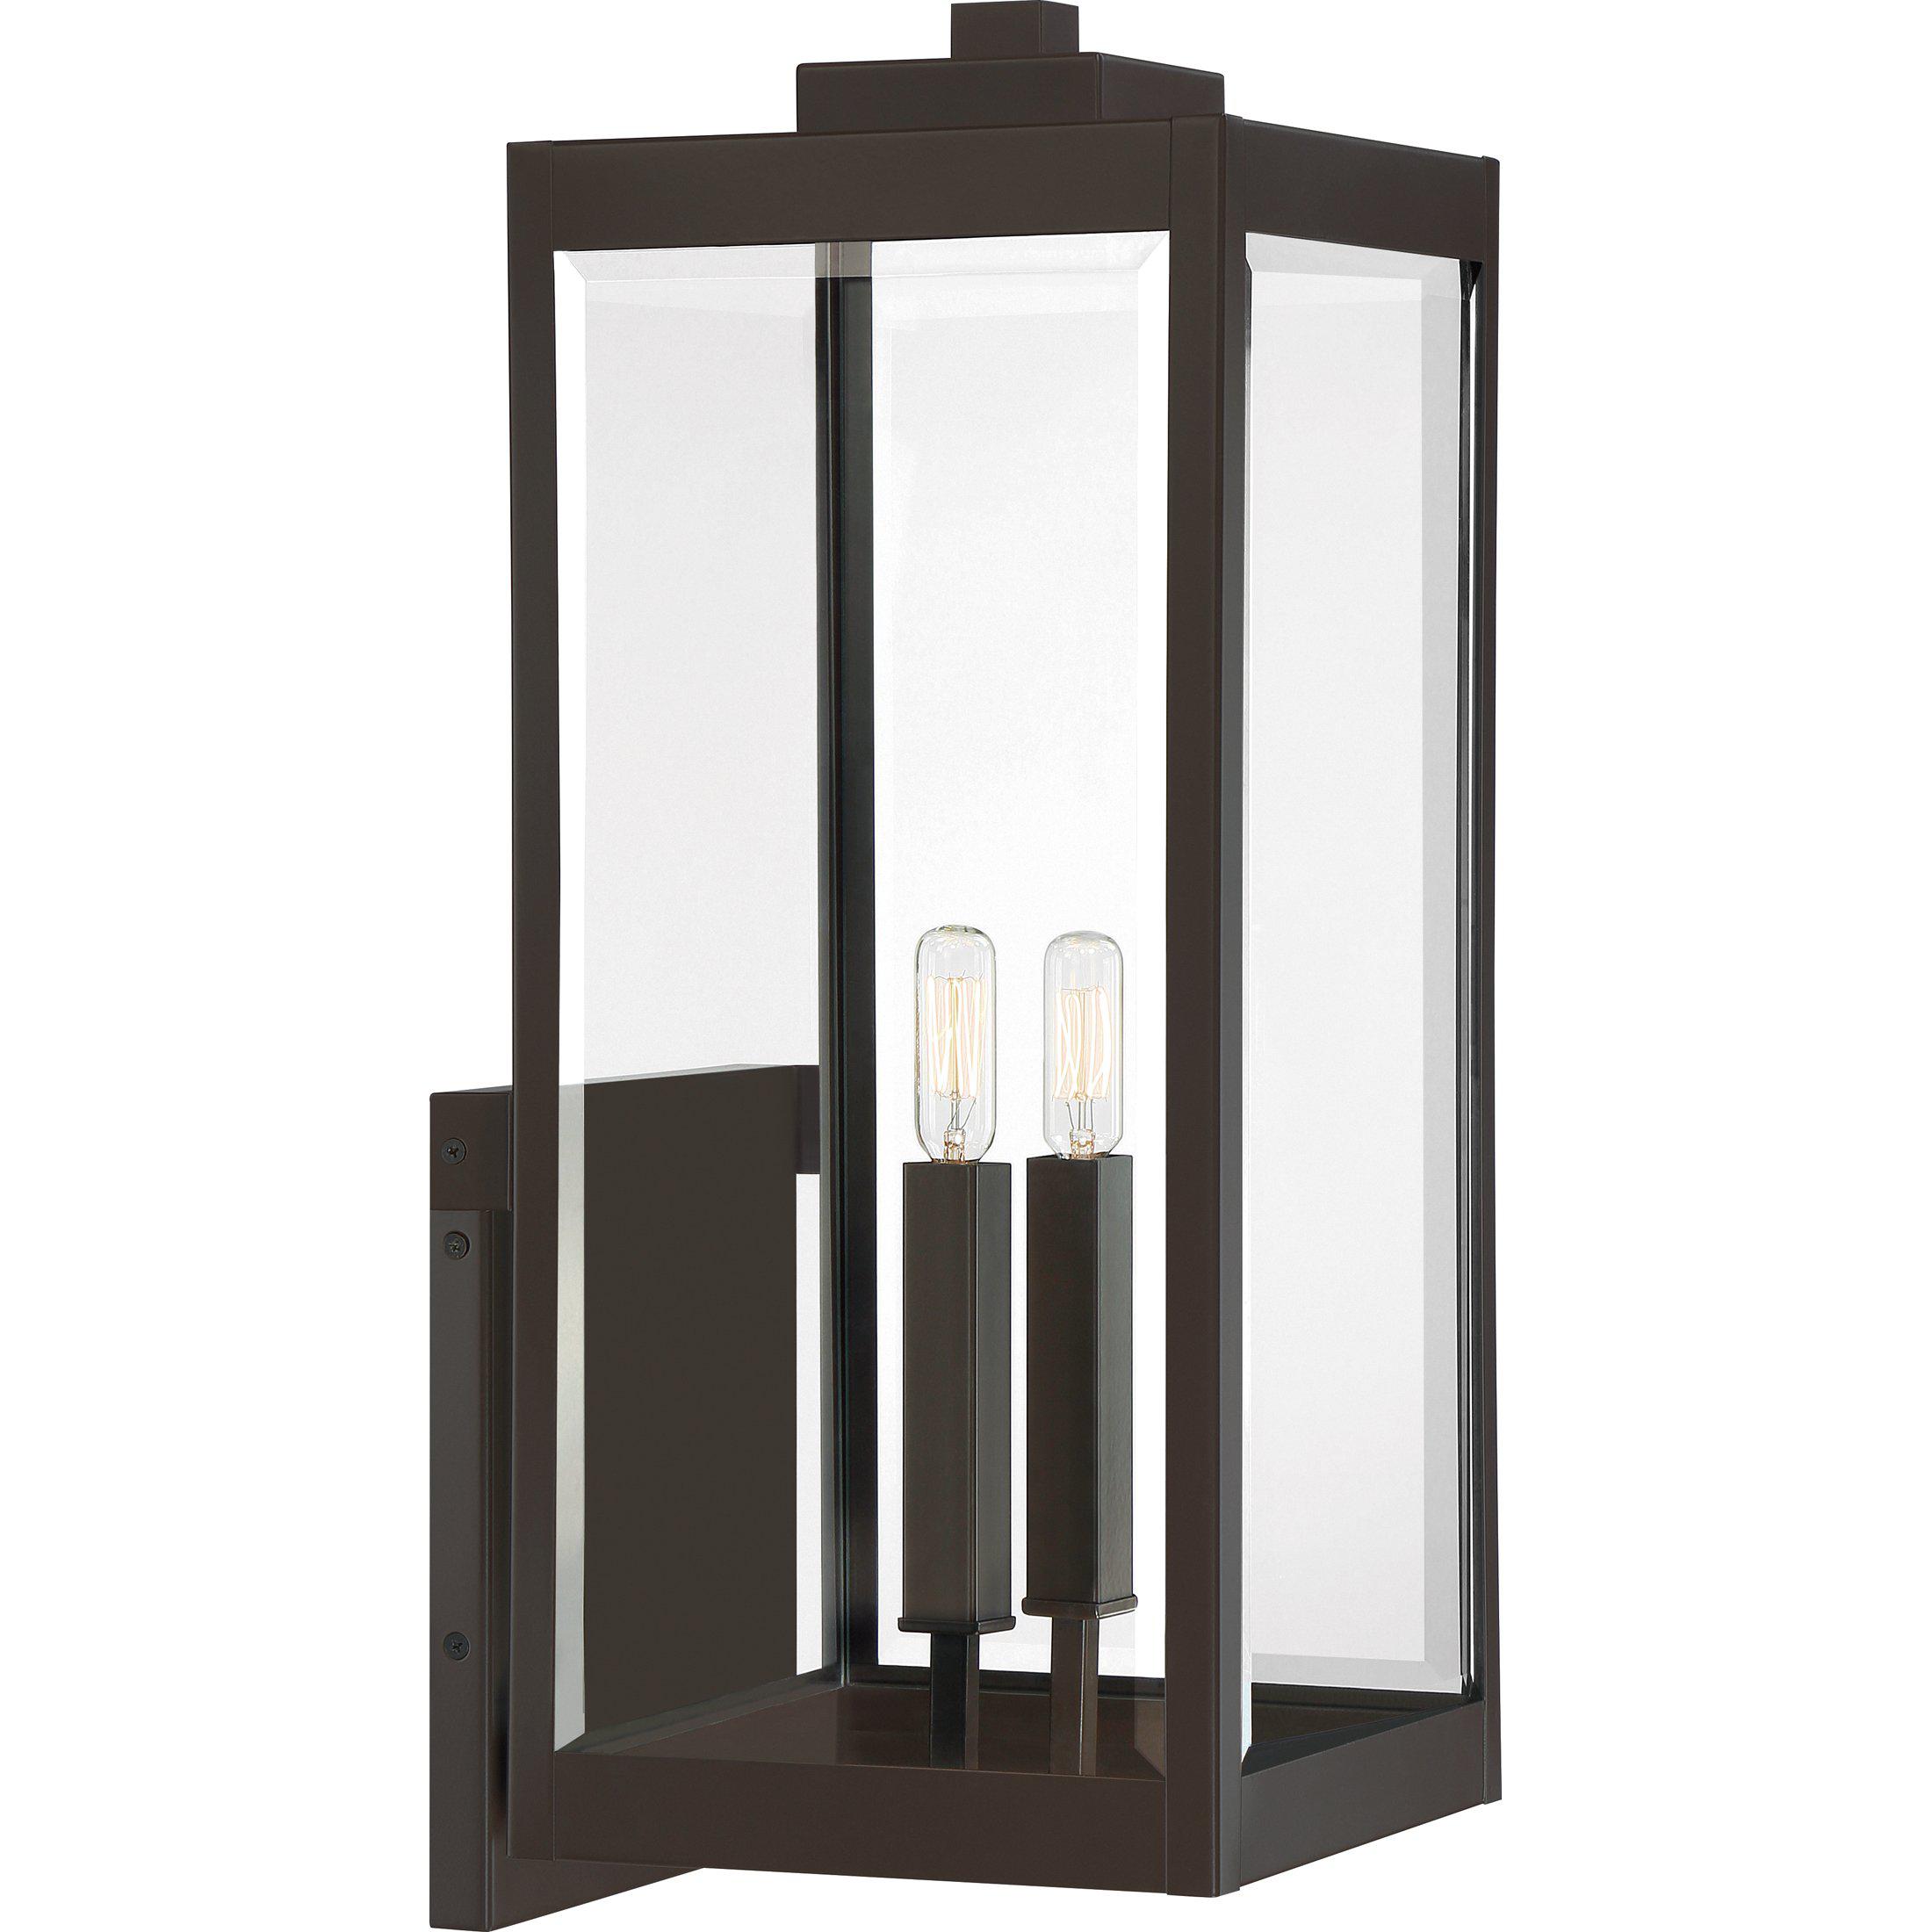 Quoizel  Westover Outdoor Lantern, XL Outdoor l Wall Quoizel Western Bronze  